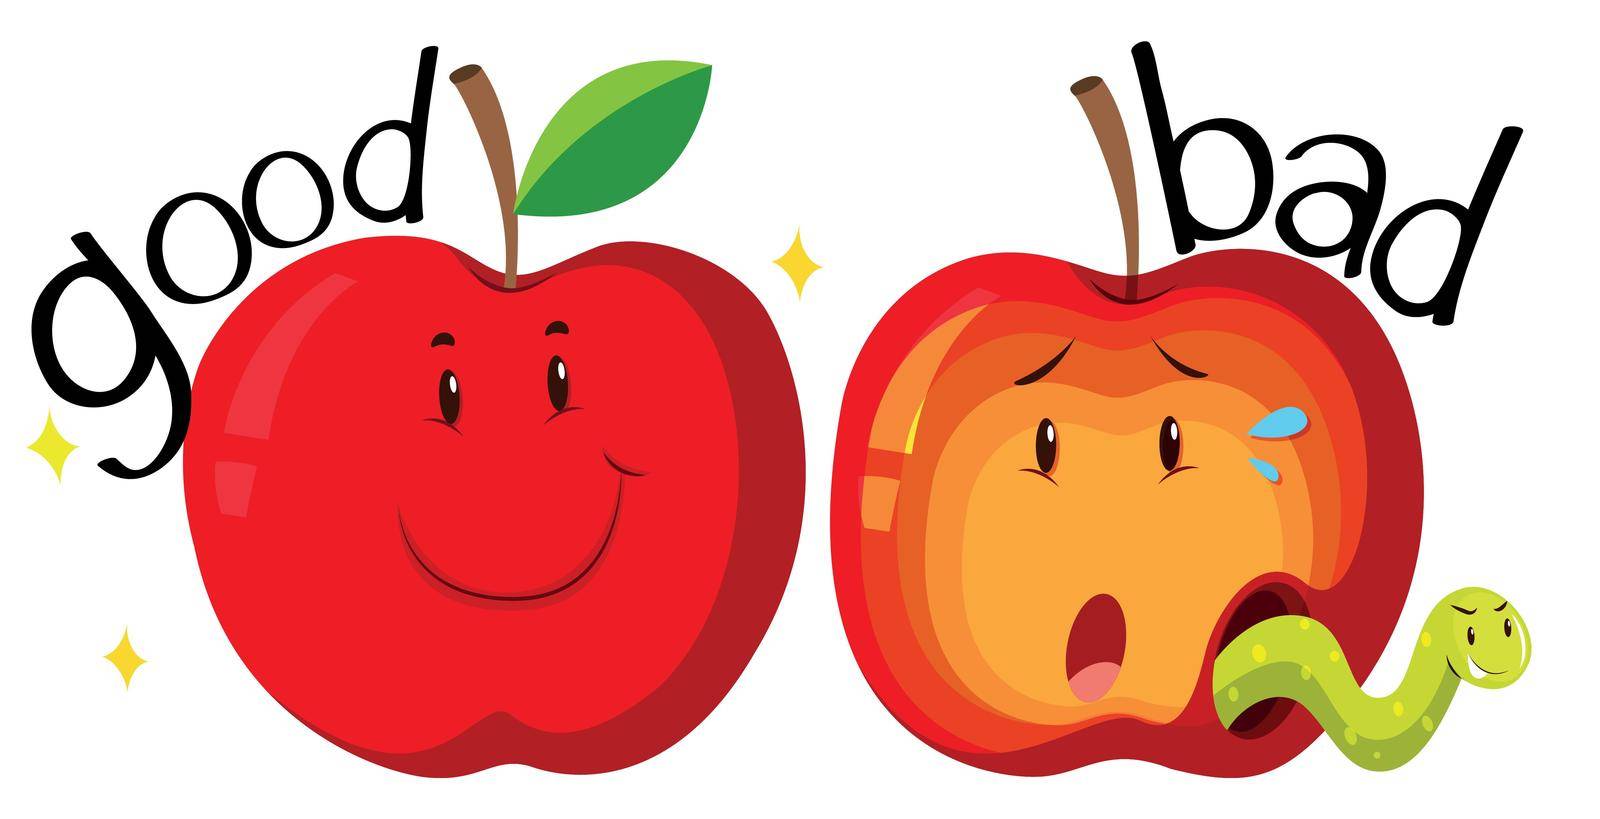 Red apples in good and bad condition illustration